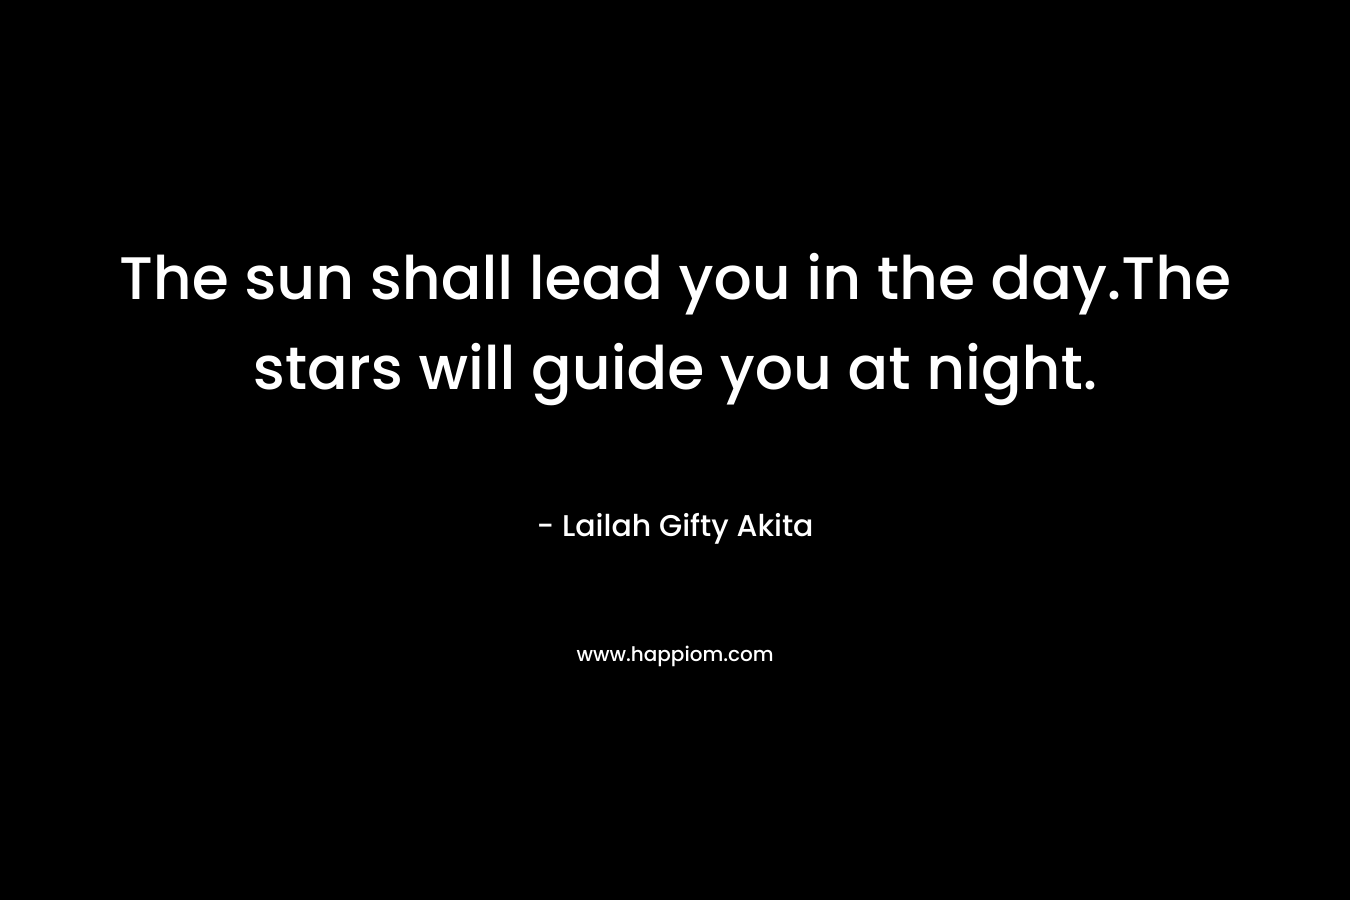 The sun shall lead you in the day.The stars will guide you at night.